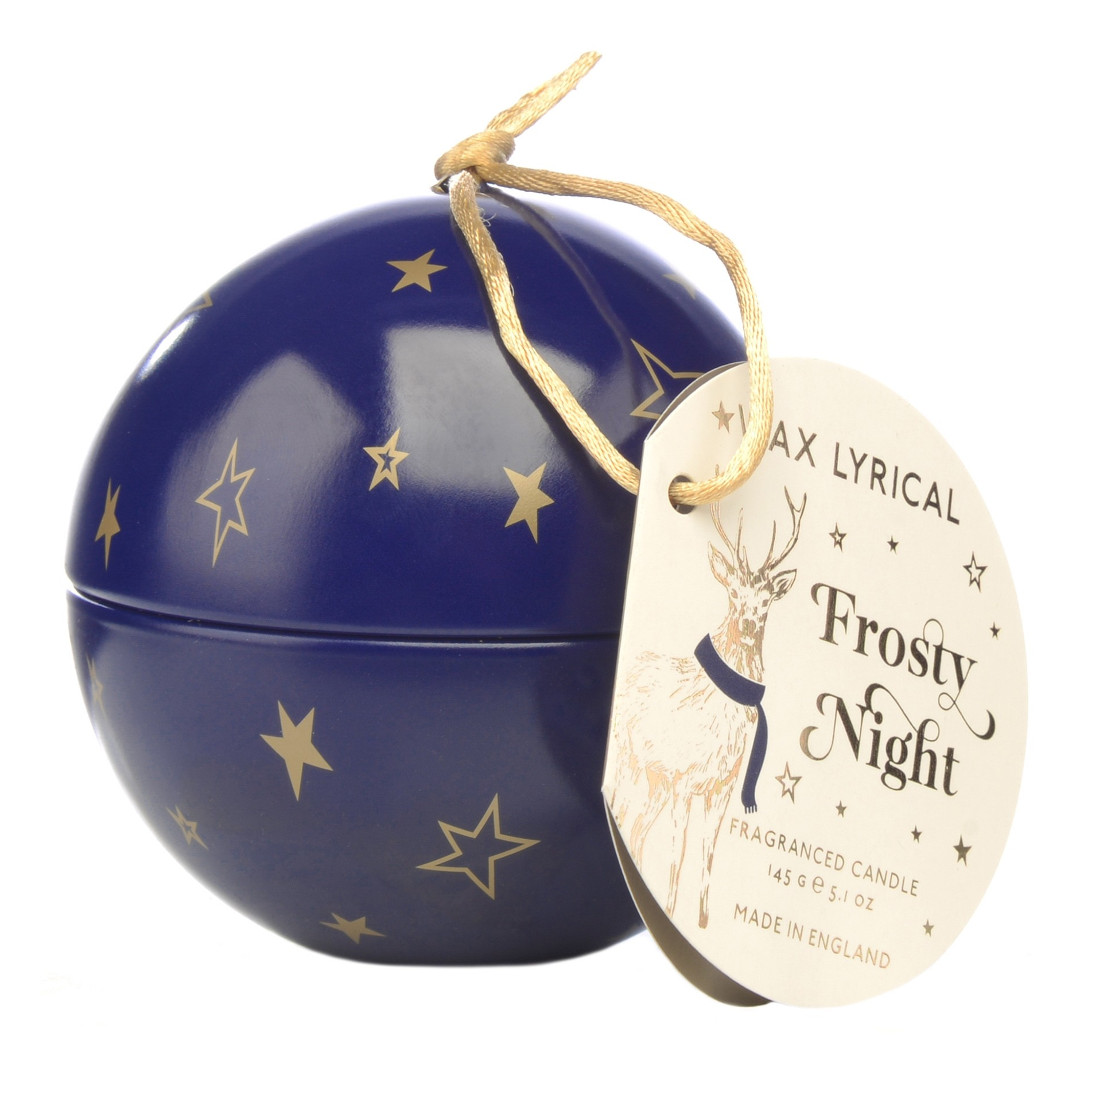 Wax Lyrical Frosty Night Bauble Candle and Cracker Diffuser